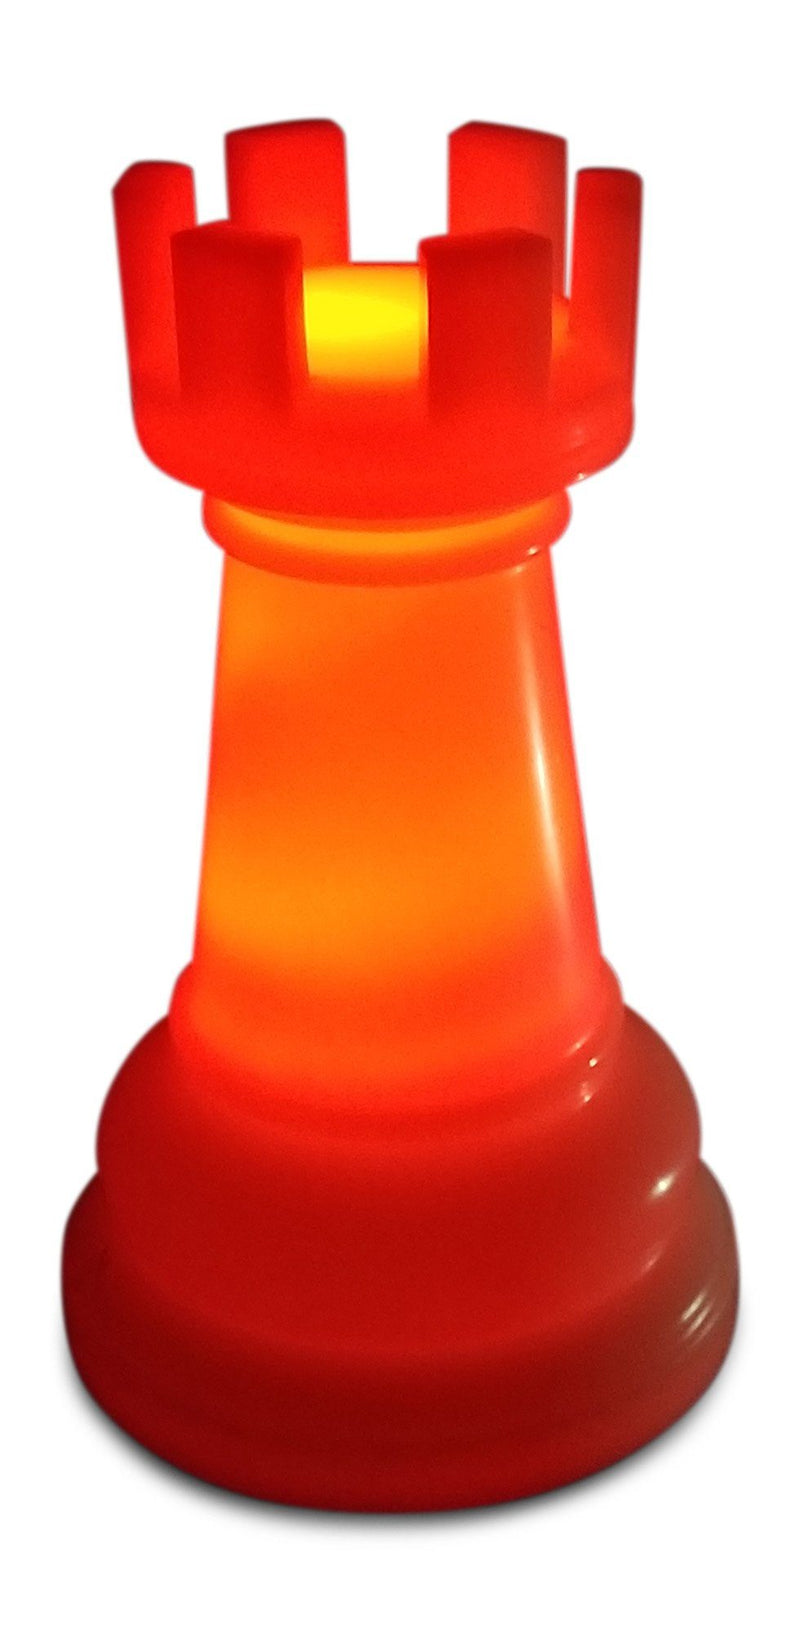 MegaChess 23 Inch Perfect Rook Light-Up Giant Chess Piece - Red |  | MegaChess.com